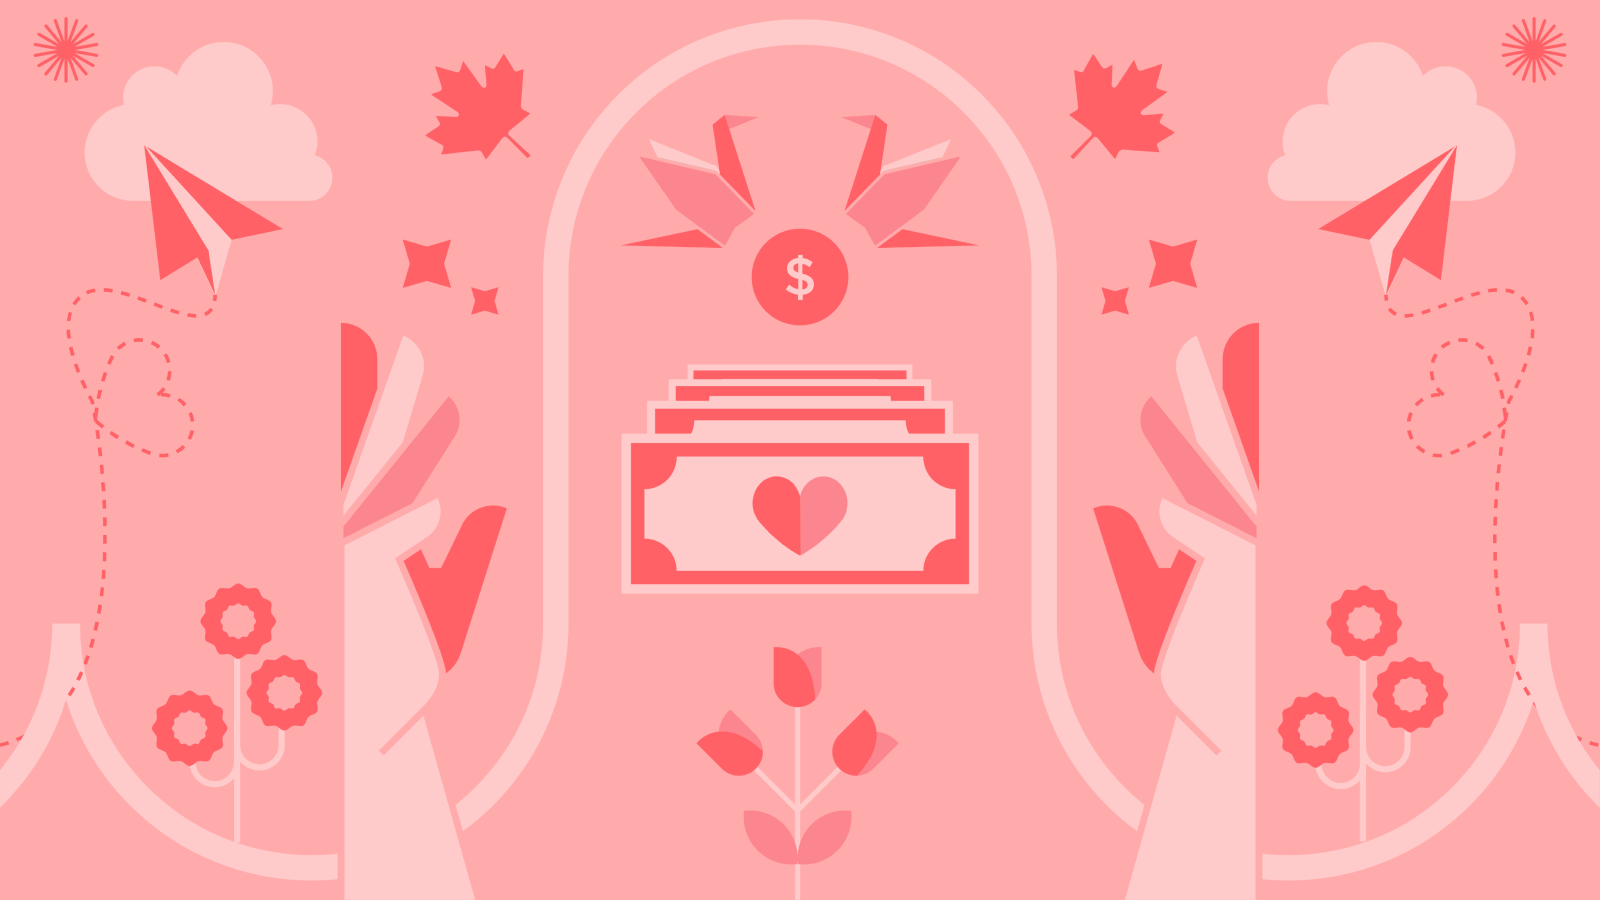 Falling in love with your finances: how to improve your relationship with money